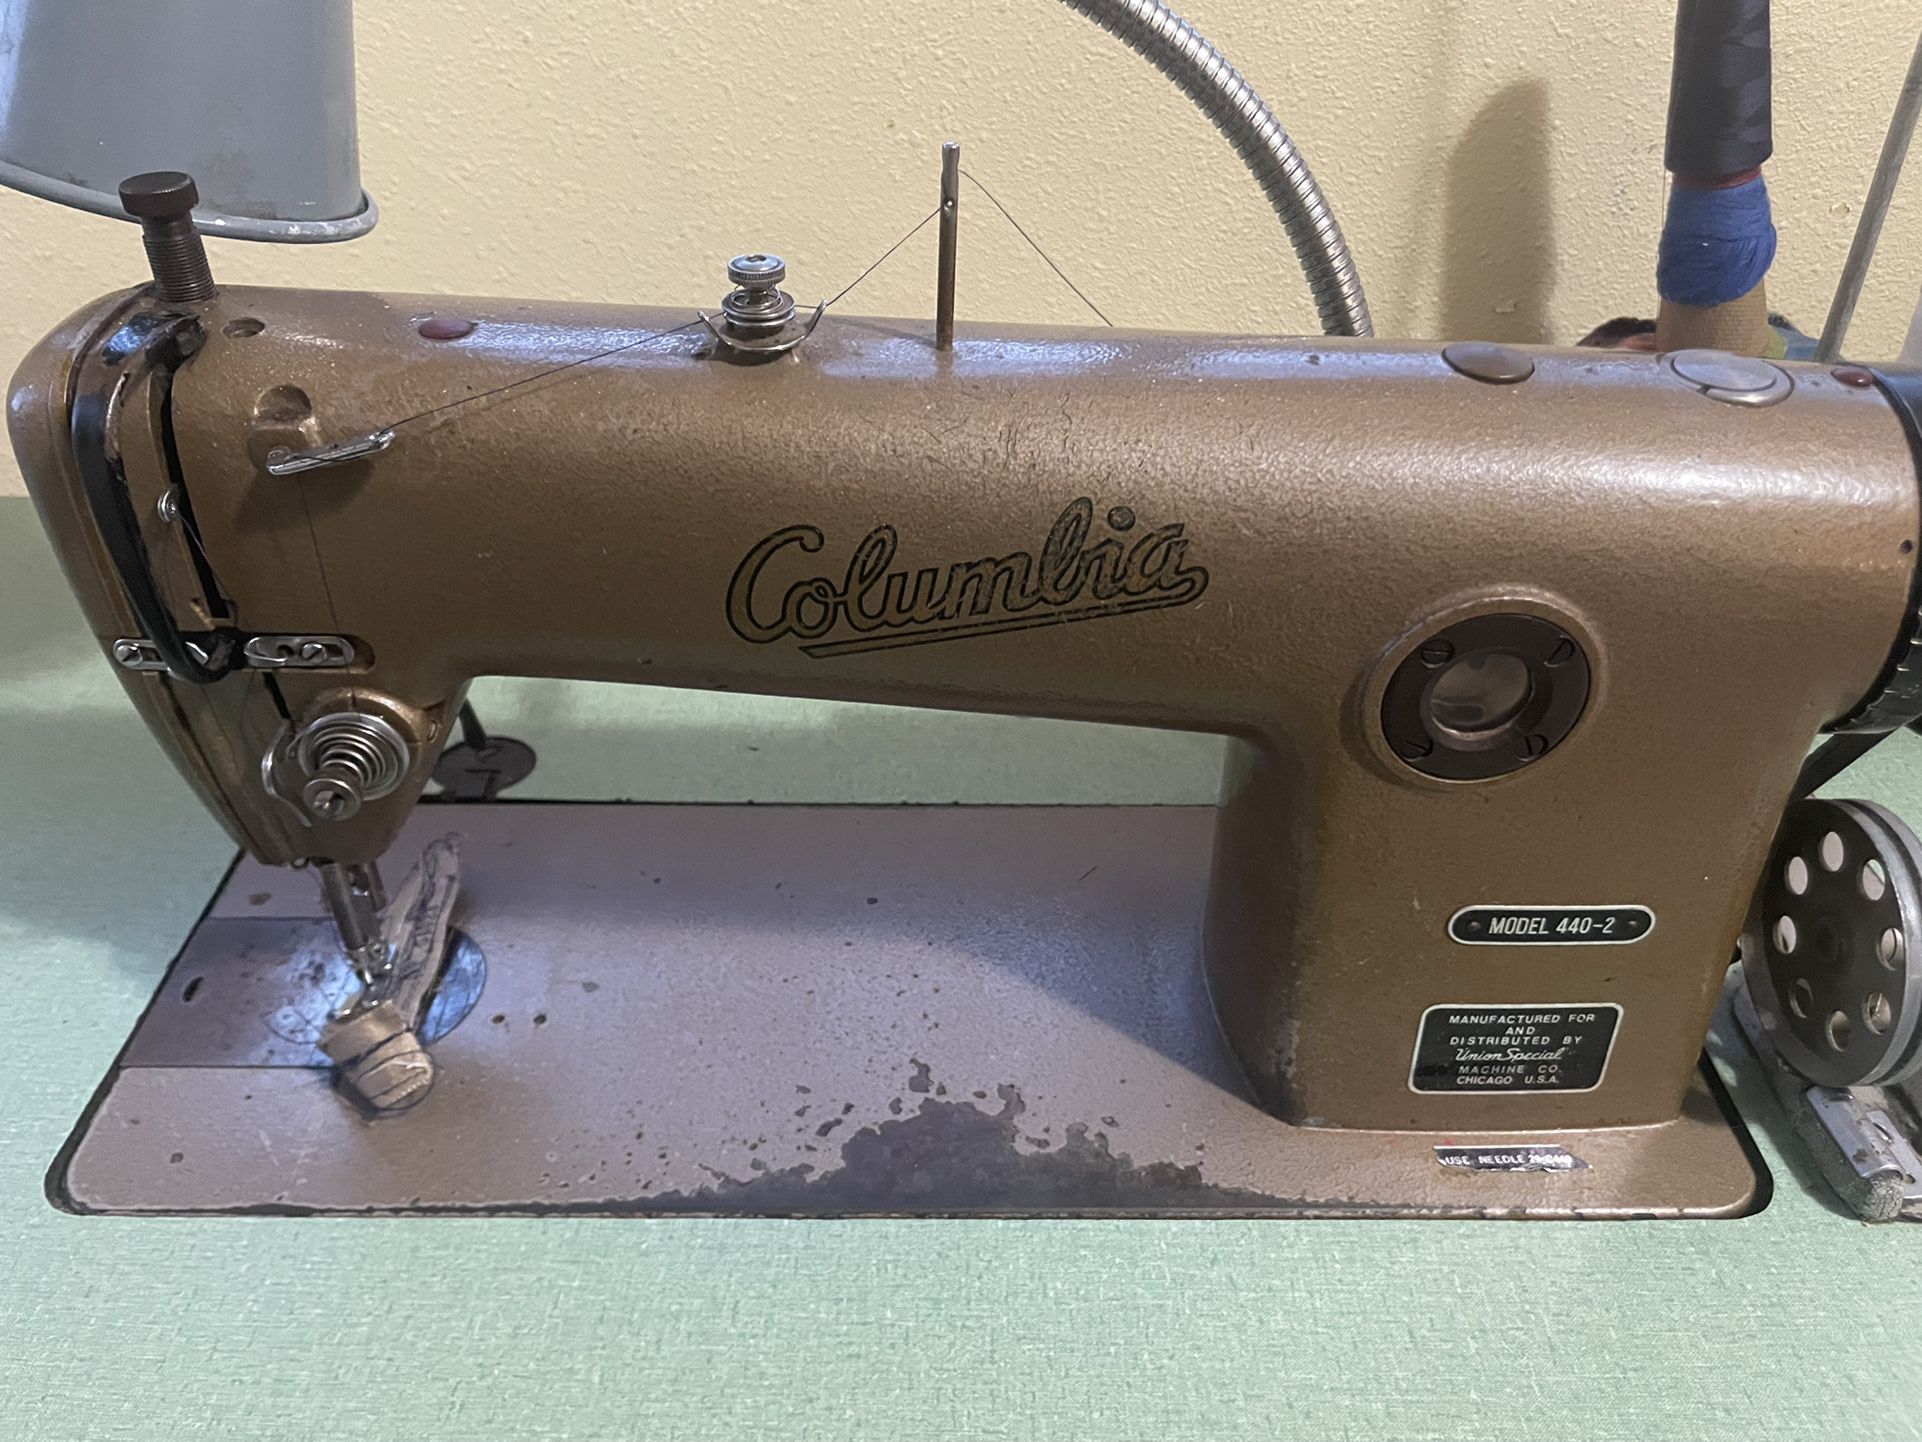 Magicfly Mini Sewing Machine for Sale in San Diego, CA - OfferUp